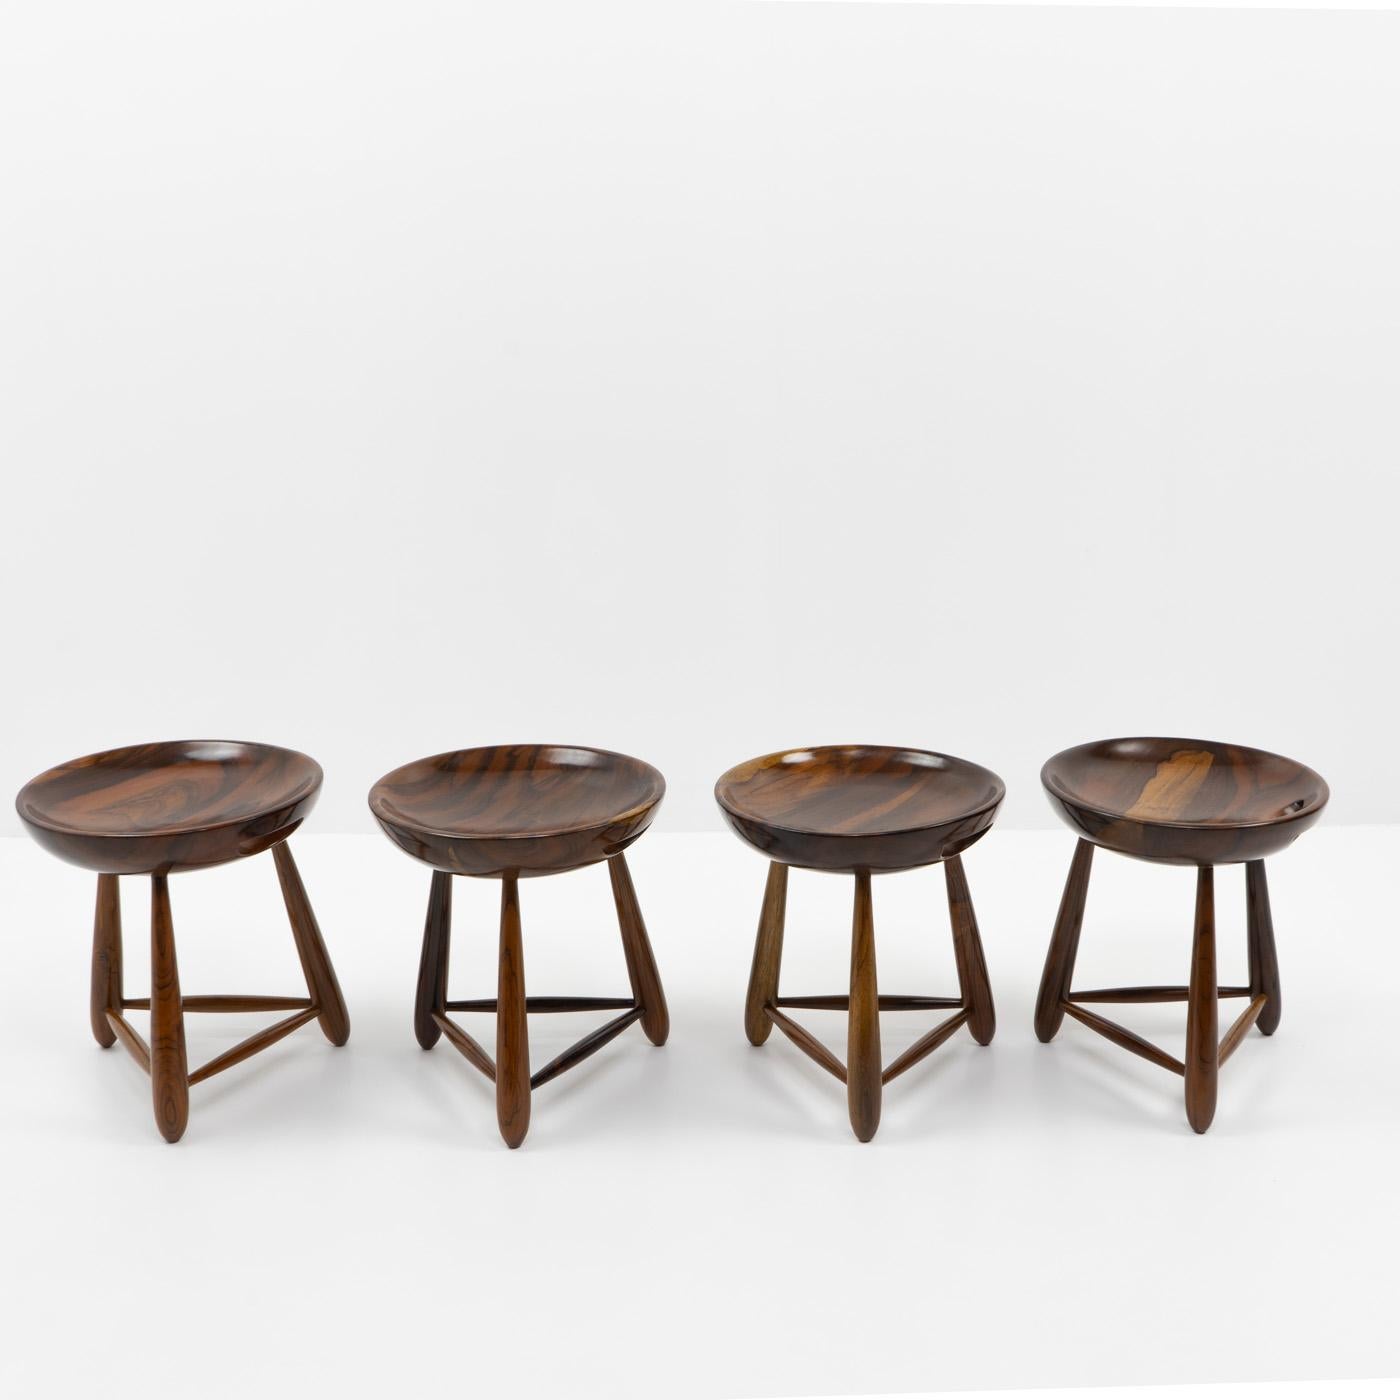 Mid-Century Modern Original Brazilian Mocho Stools by Sergio Rodrigues for OCA, 1950s For Sale